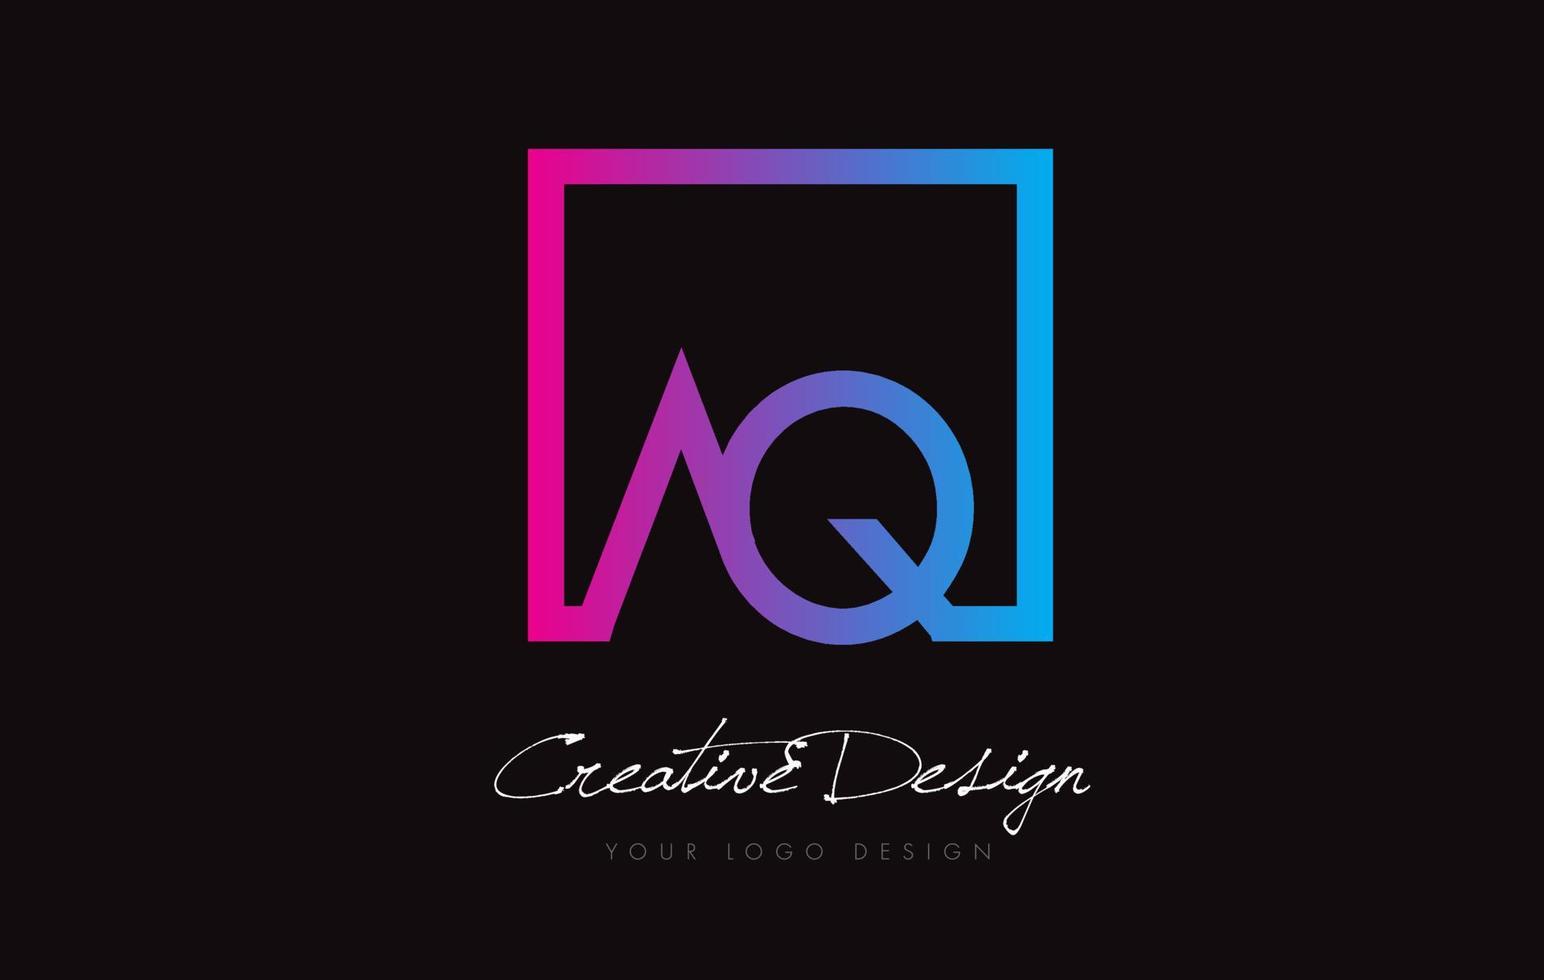 AQ Square Frame Letter Logo Design with Purple Blue Colors. vector